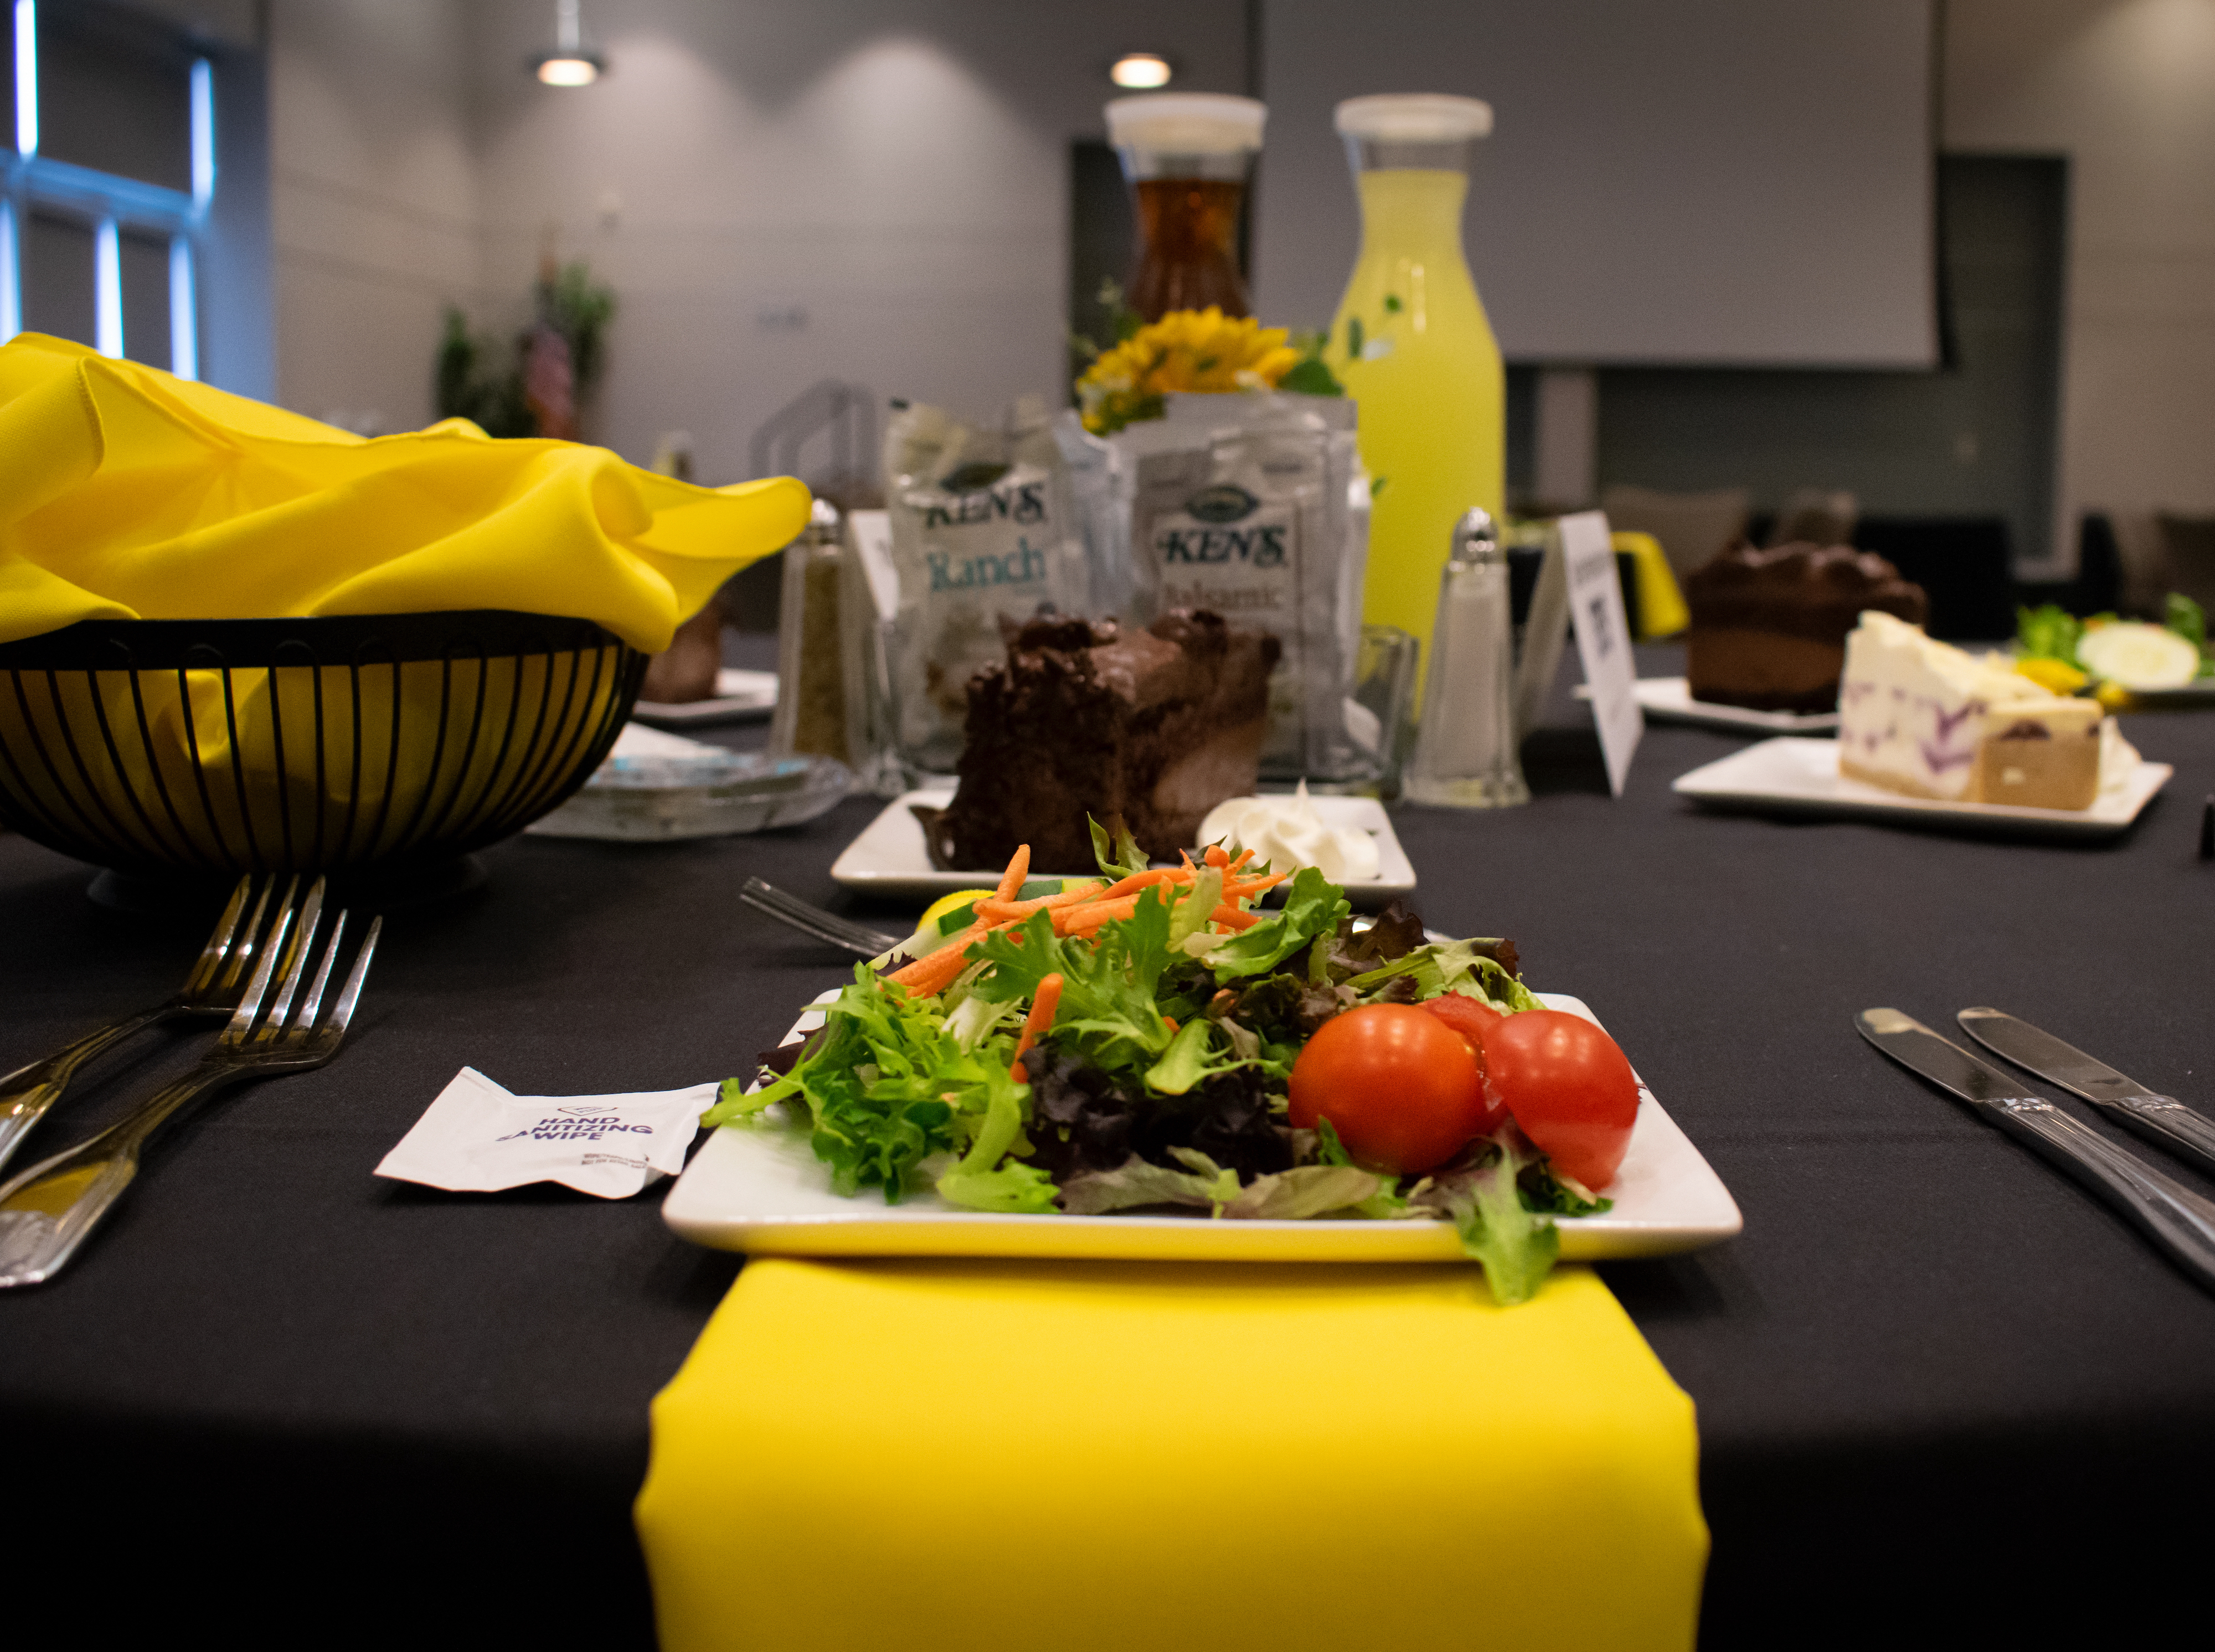 Place setting with salad and dessert